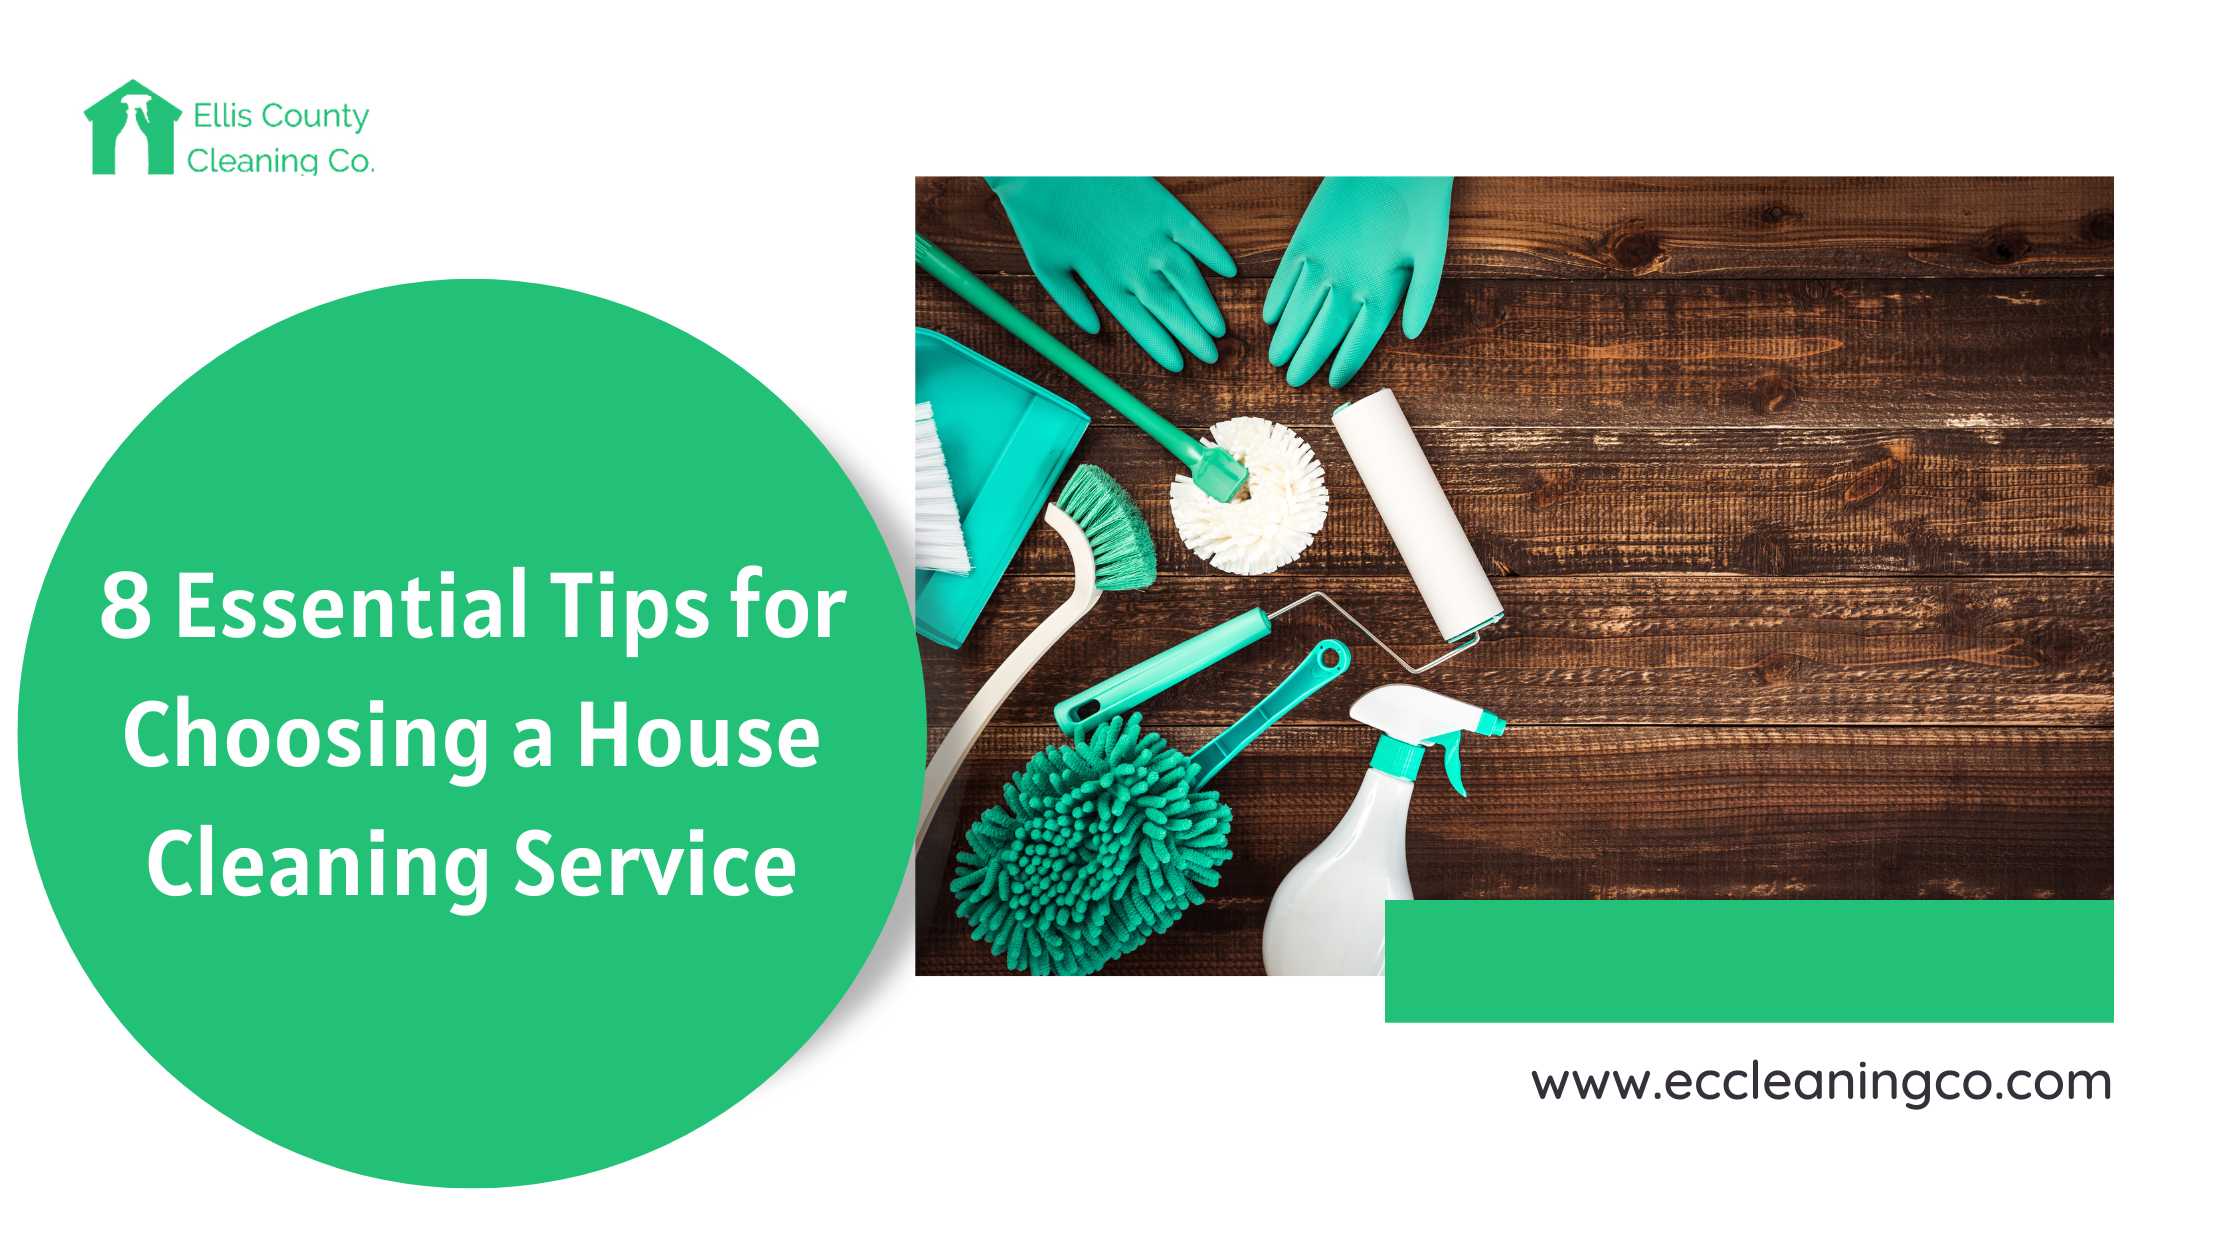 8 Essential Tips for Choosing a House Cleaning Service